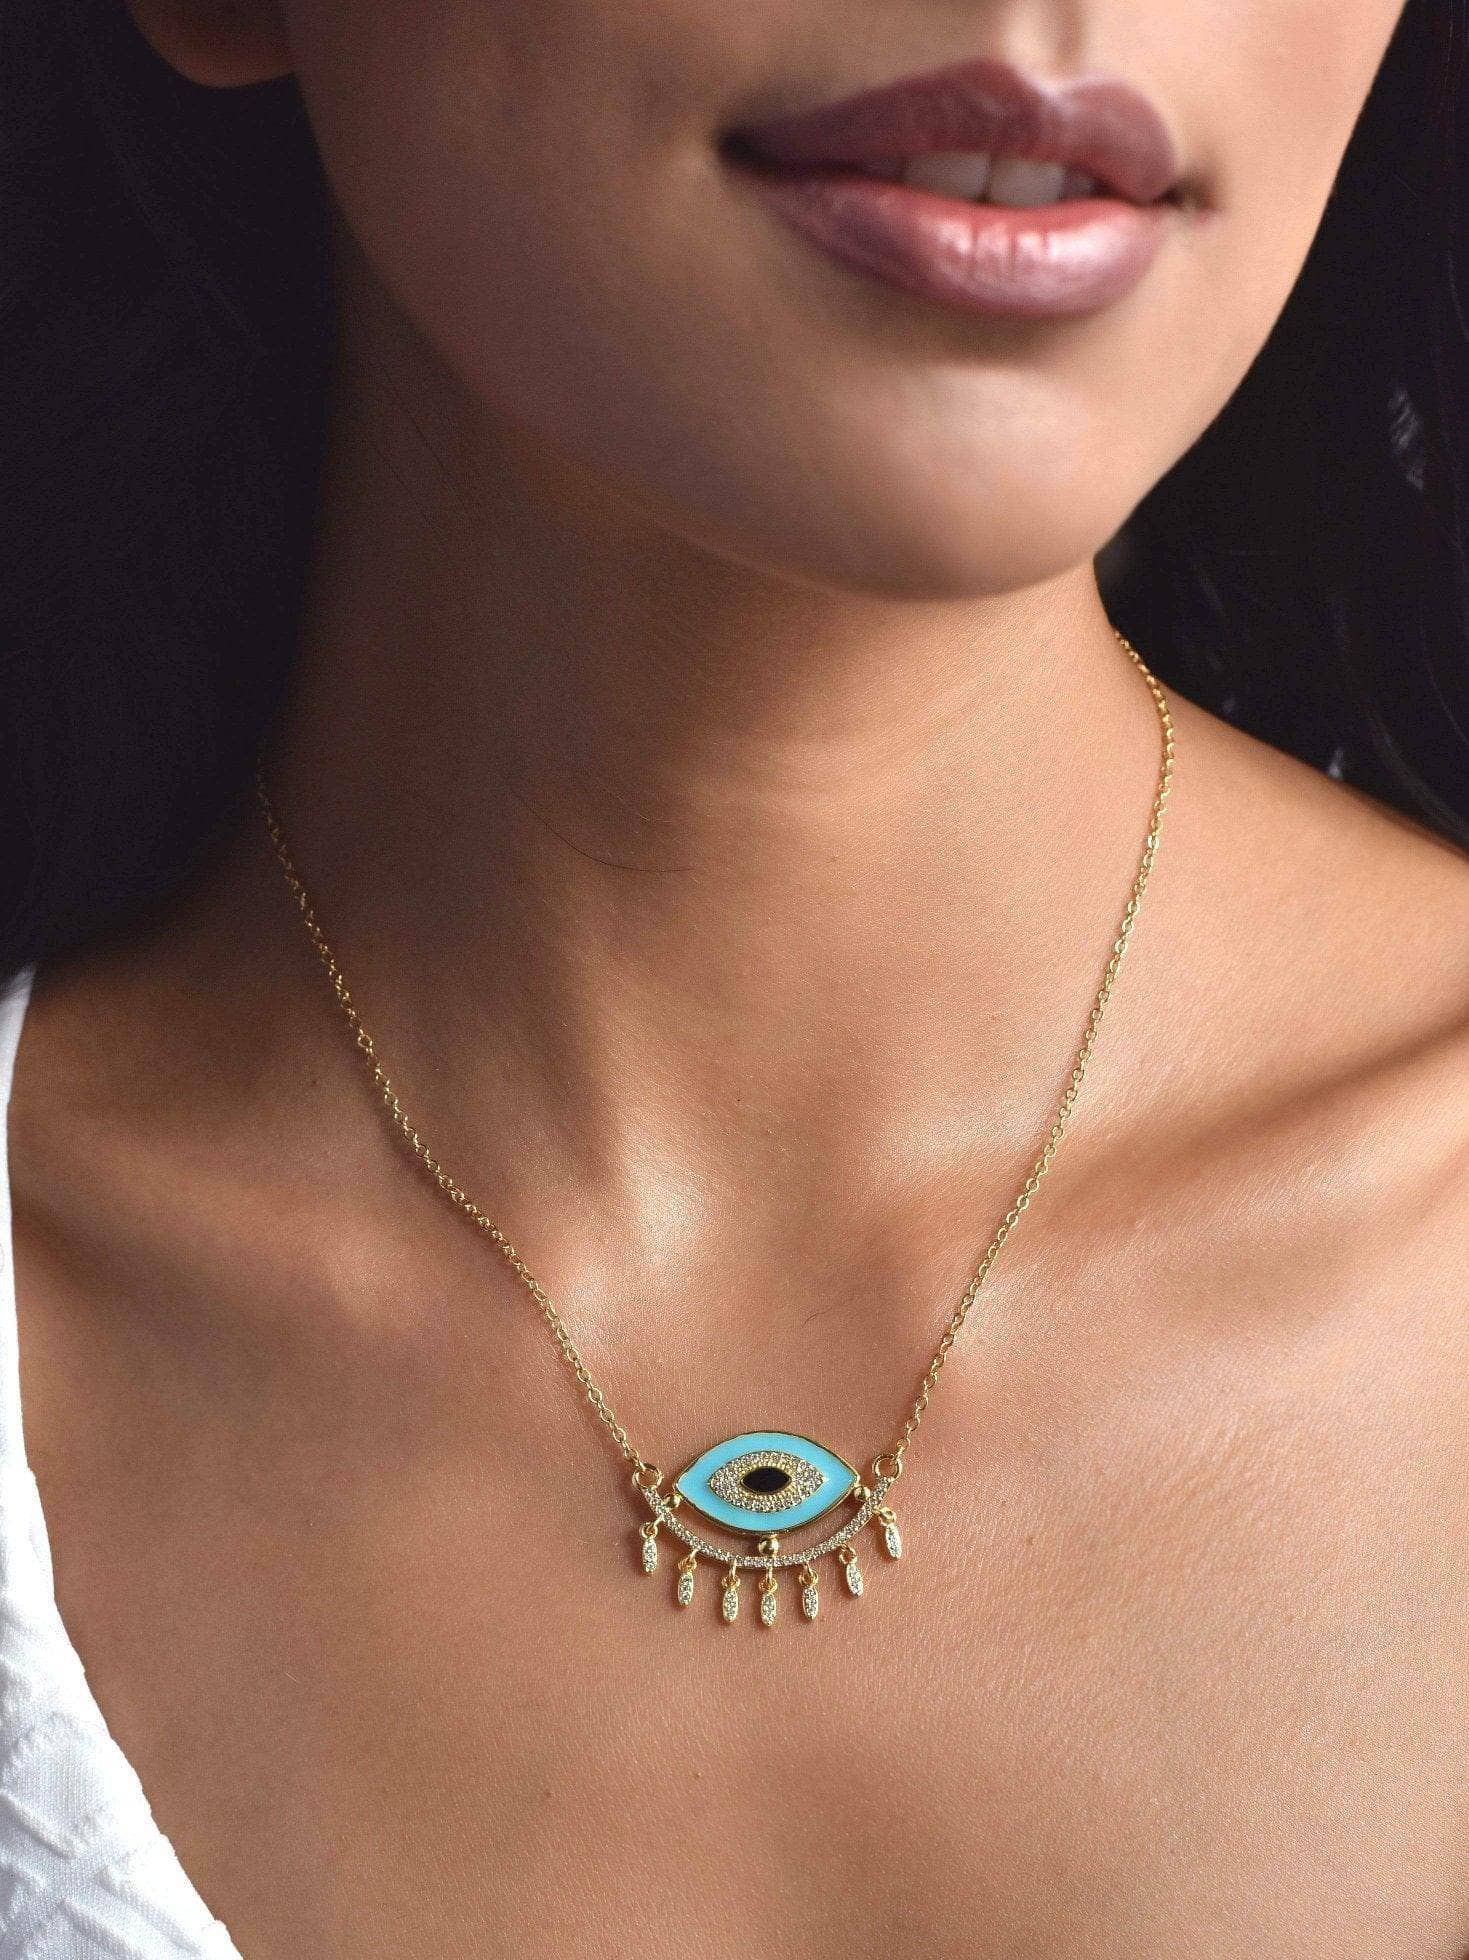 Klissaa necklace Blue Evil Eye Pendant With Gold Chain